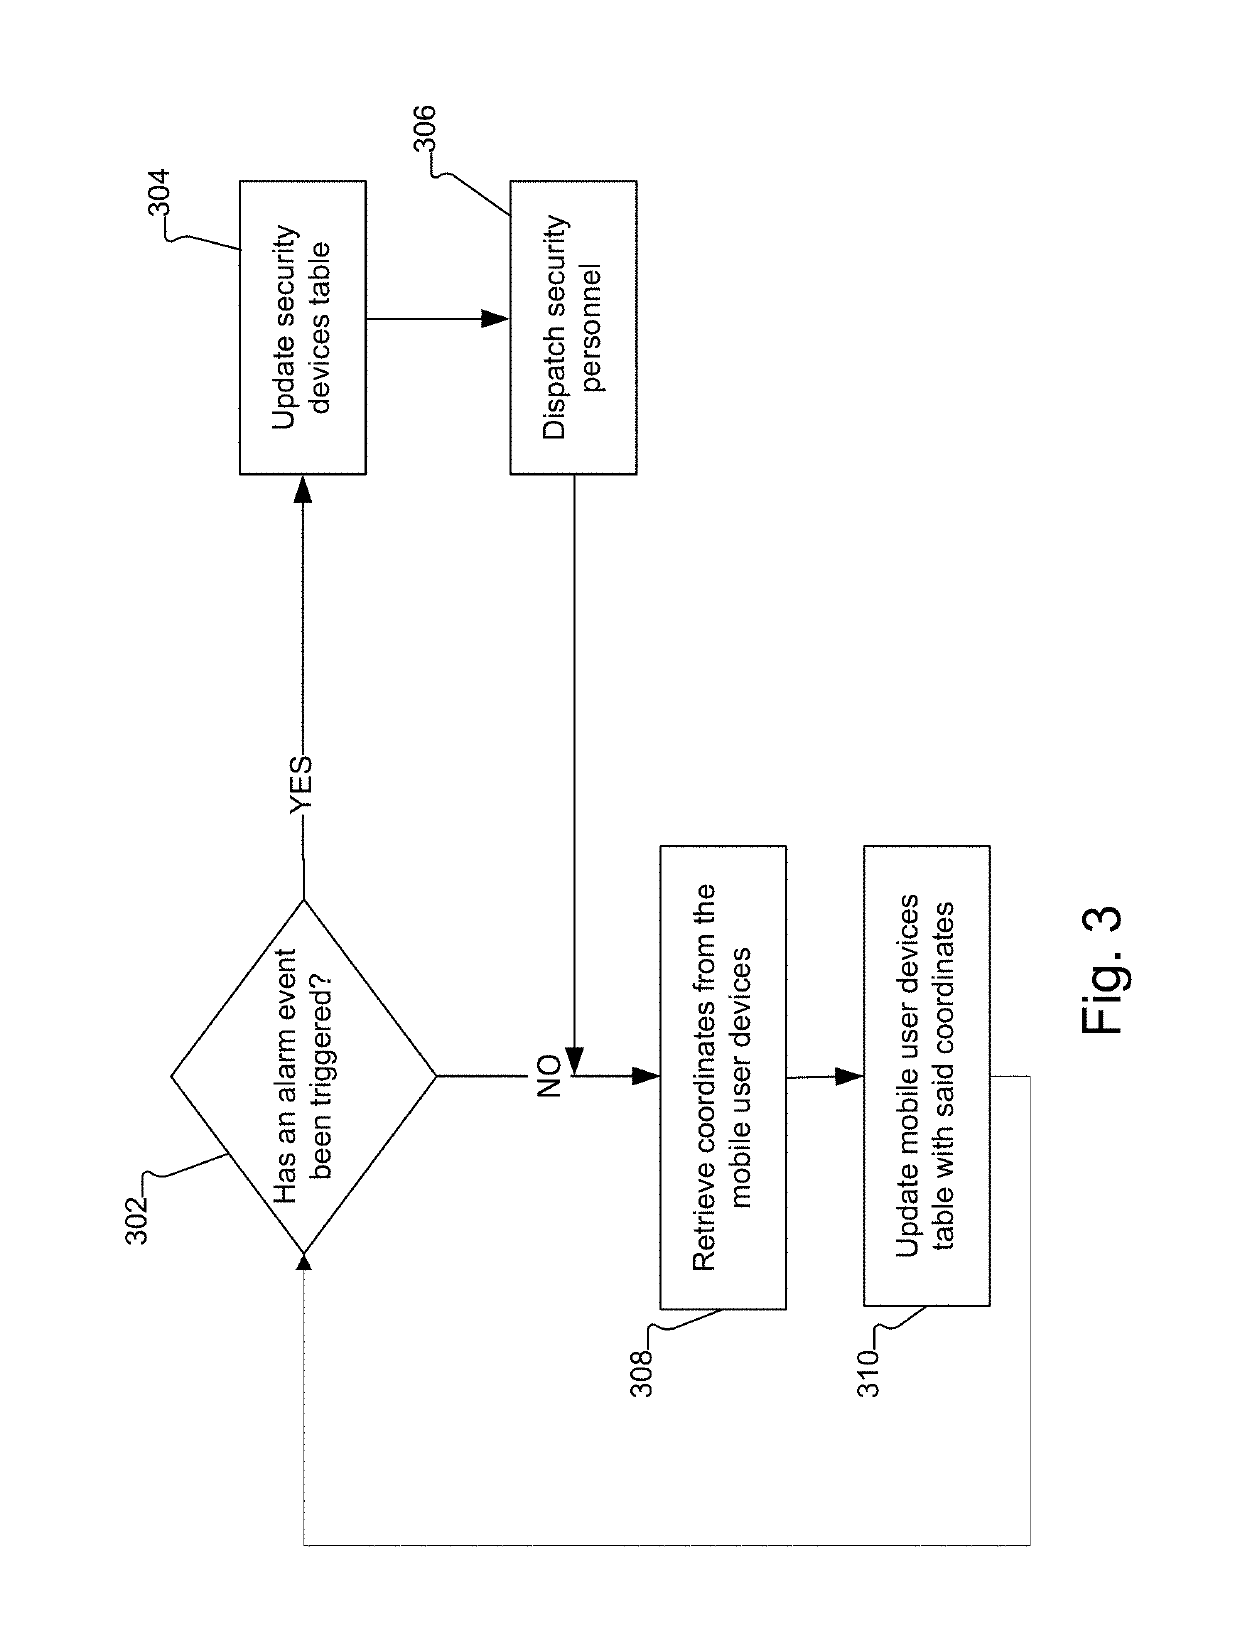 System and method for video/audio and event dispatch using positioning system